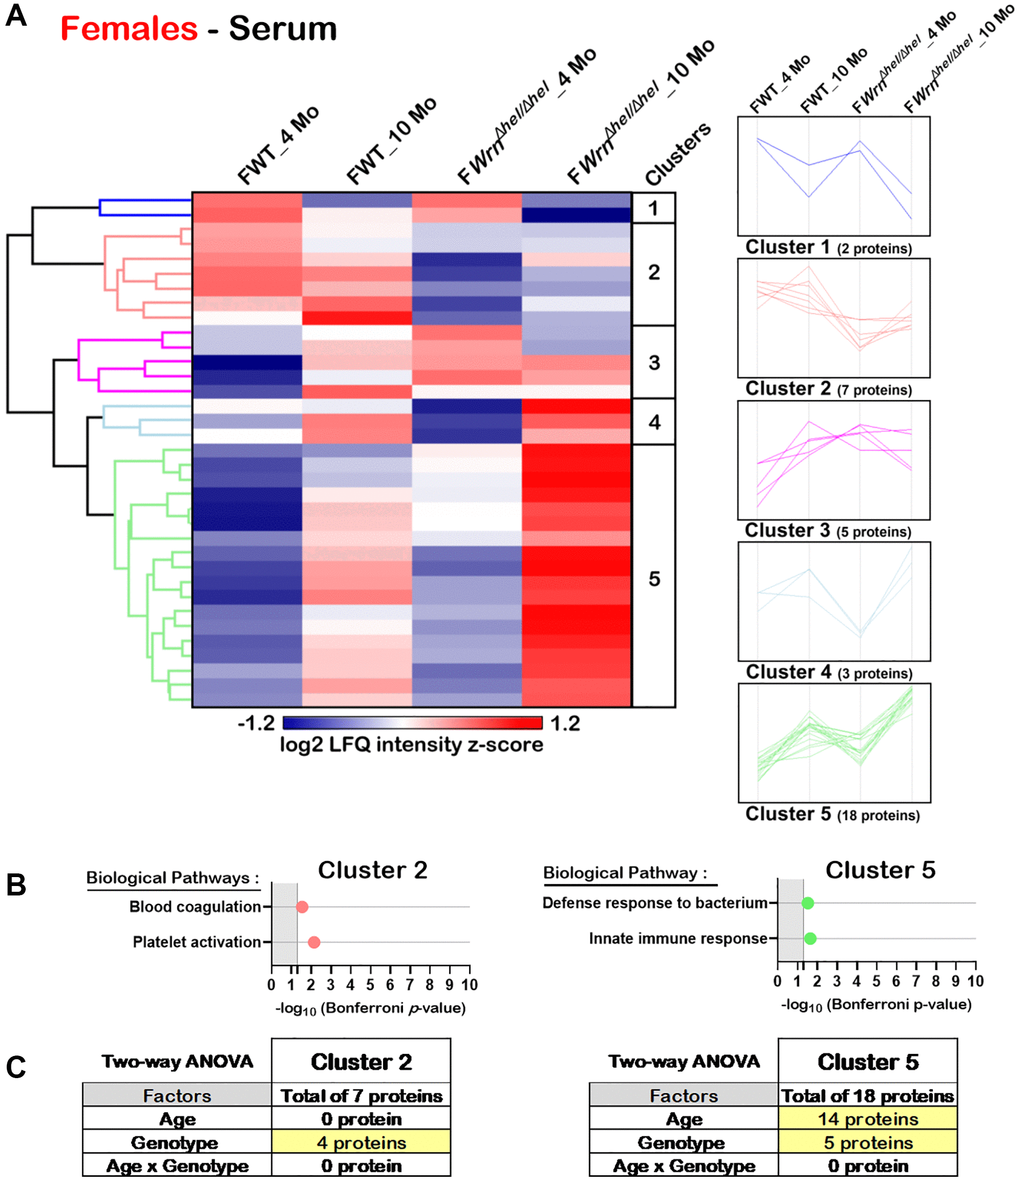 Significant proteomic changes in the serum of wild type and WrnΔhel/Δhel females at four and ten months of age. (A) Hierarchical clustering of label-free quantification (LFQ) intensities of 35 serum proteins that differed significantly in at least one of the comparisons between the various female groups with a two-fold change, a p-value 1.96. Numbers of proteins and intensity profiles are indicated for each cluster trend plots. (B) Gene ontology analysis of Cluster 2 and Cluster 5 that exhibited significant altered biological pathways between the different groups of females. (C) Two-way ANOVA showing the number of proteins that significantly changed based on the age and/or the genotype of the females in Cluster 2 and Cluster 5.